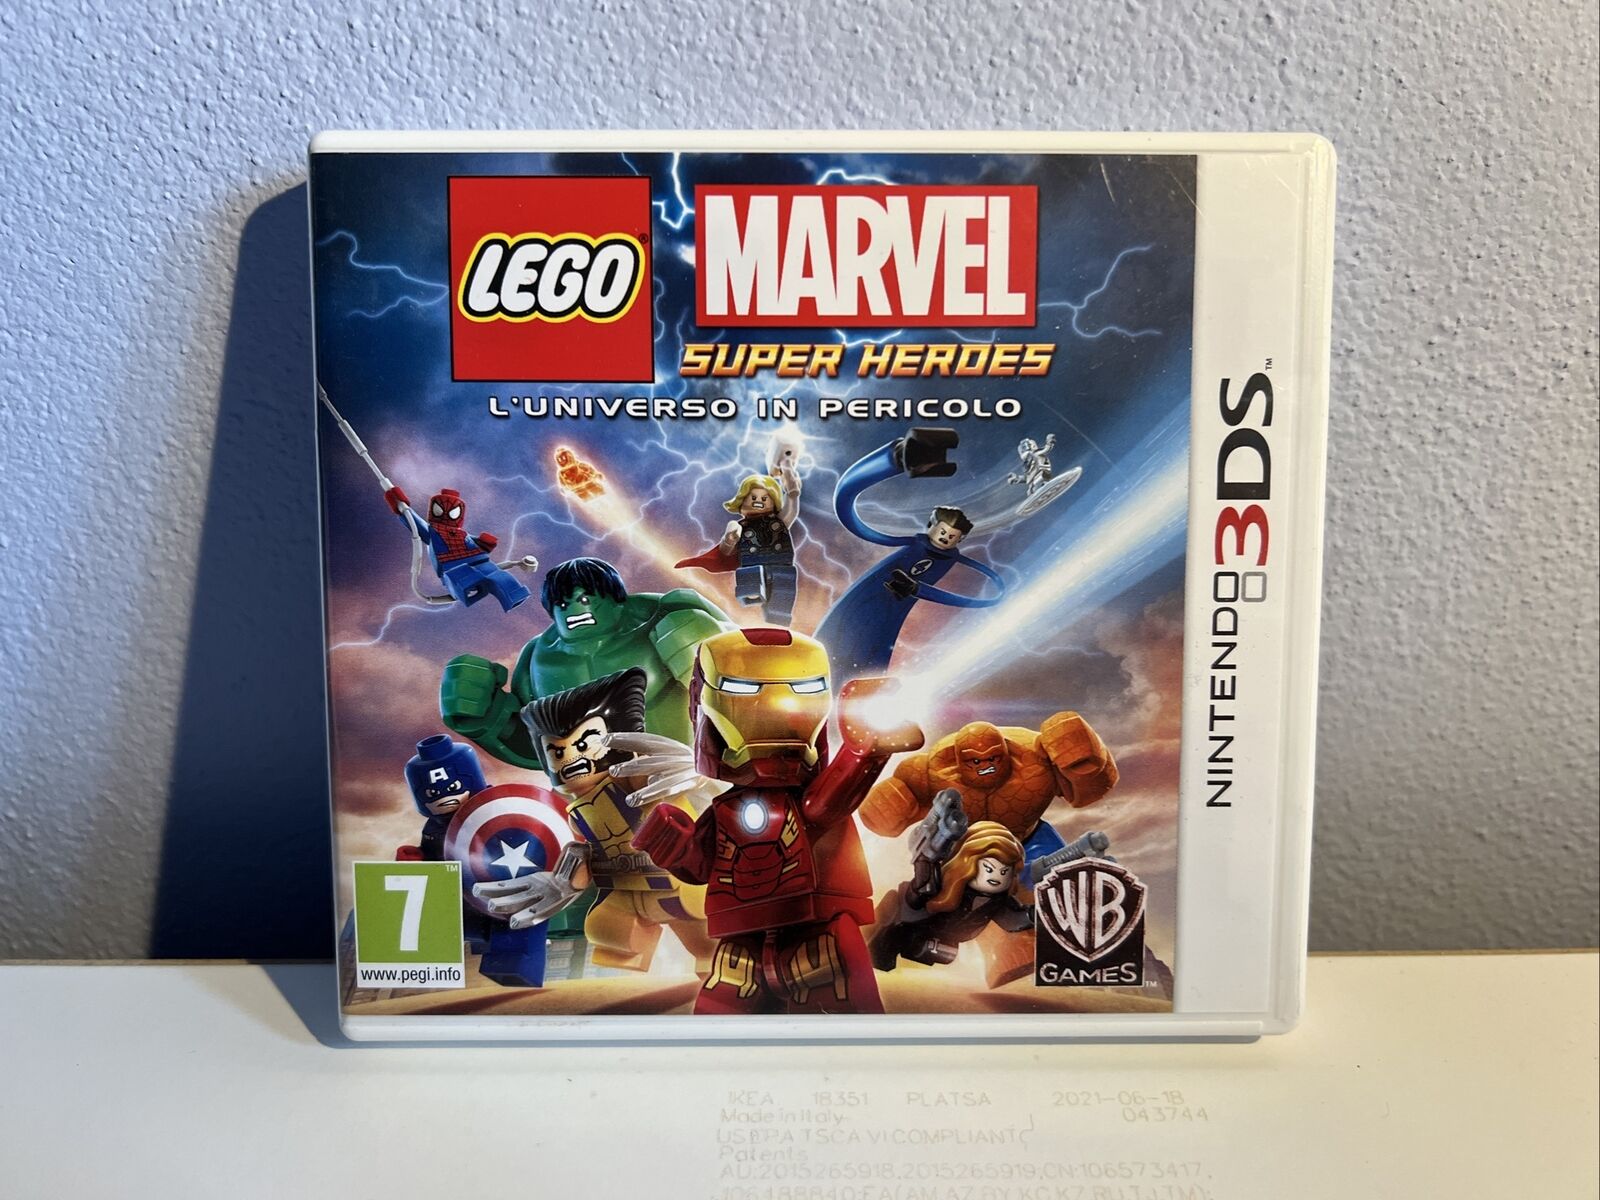 Nintendo-3DS2DS-videogame-Lego-Marvel-Super-Heroes-Luniverso-In-Pericolo-133937276758